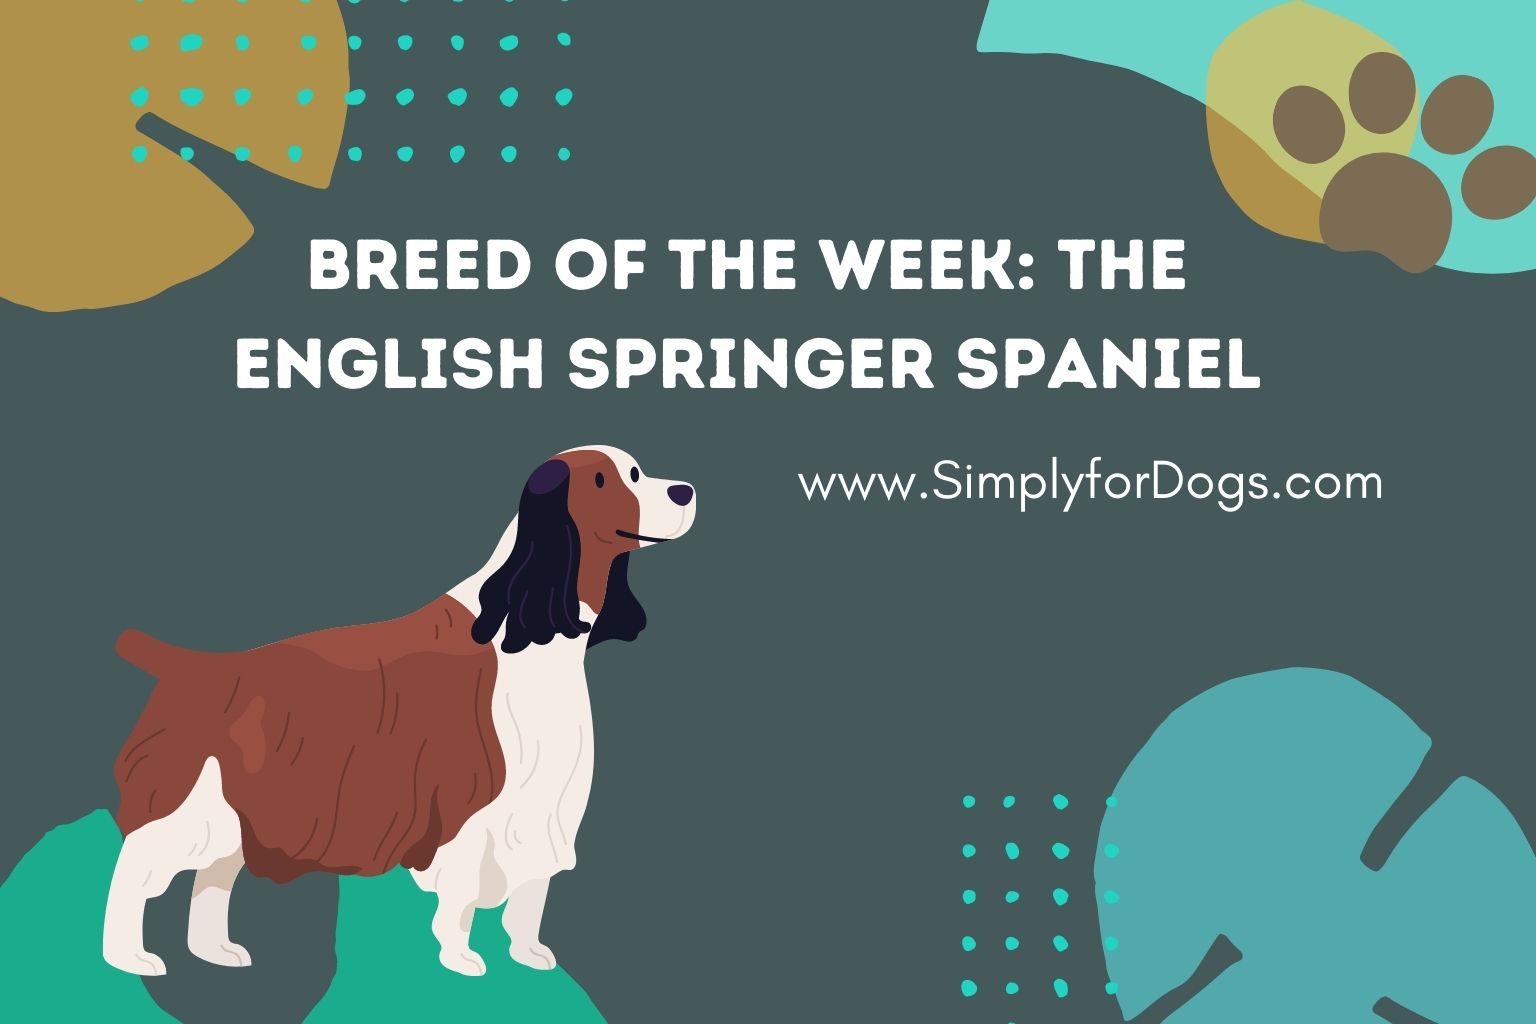 Breed of the Week_ The English Springer Spaniel